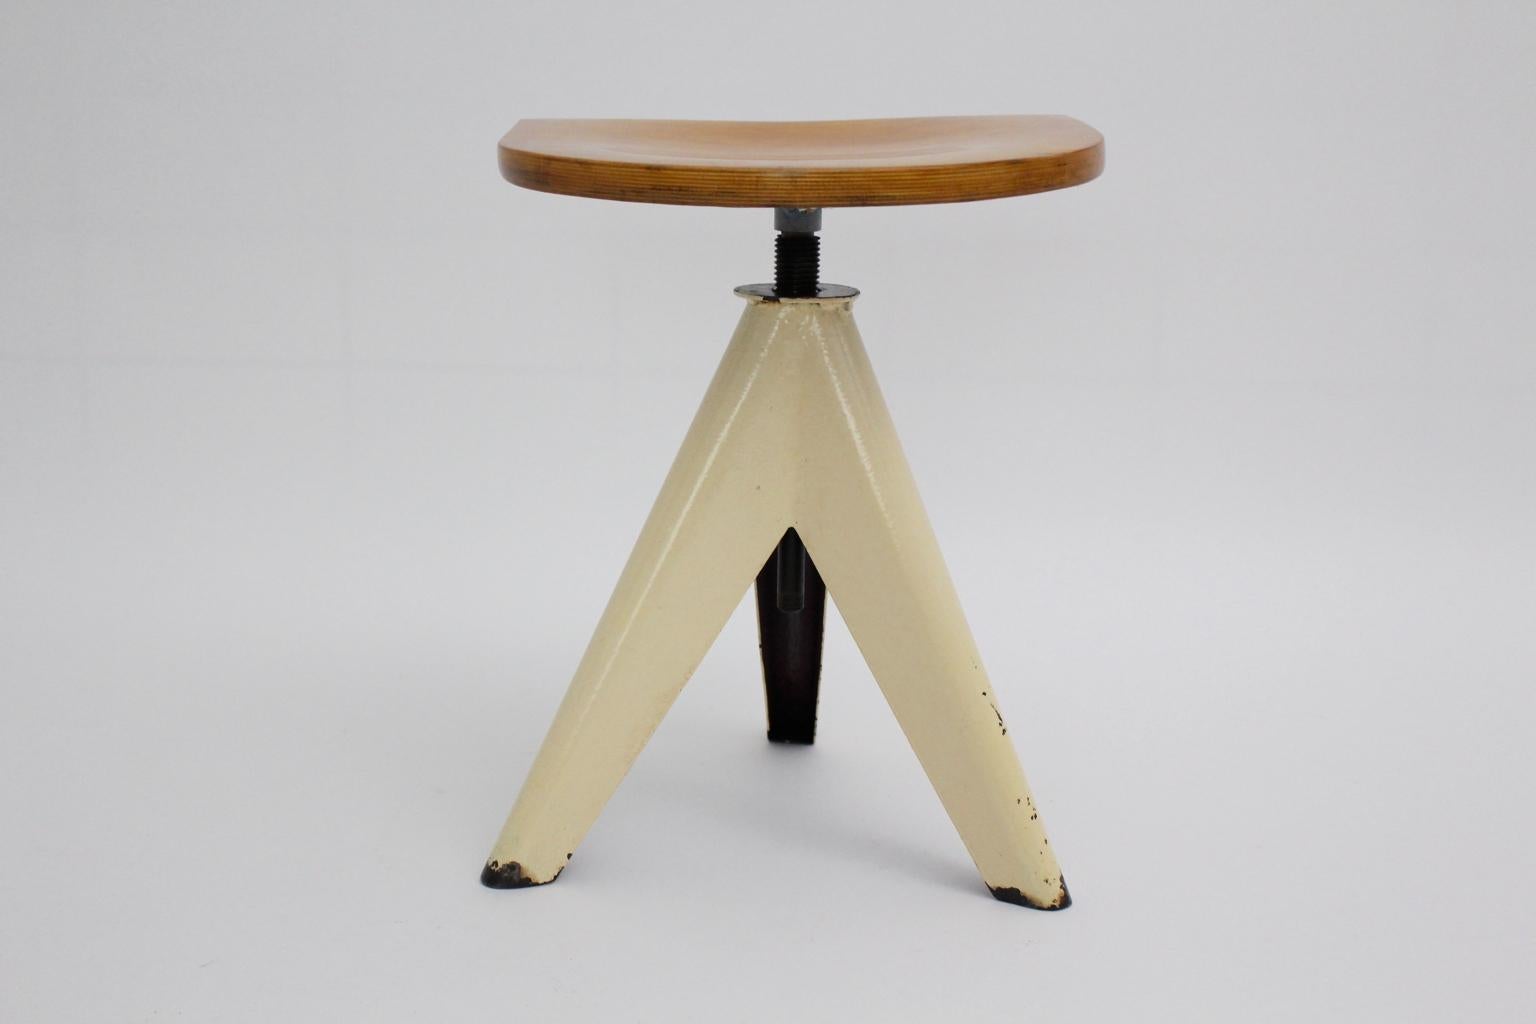 Lacquered Mid-Century Modern White Vintage Metal Beech Tripod Industry Stool, circa 1950